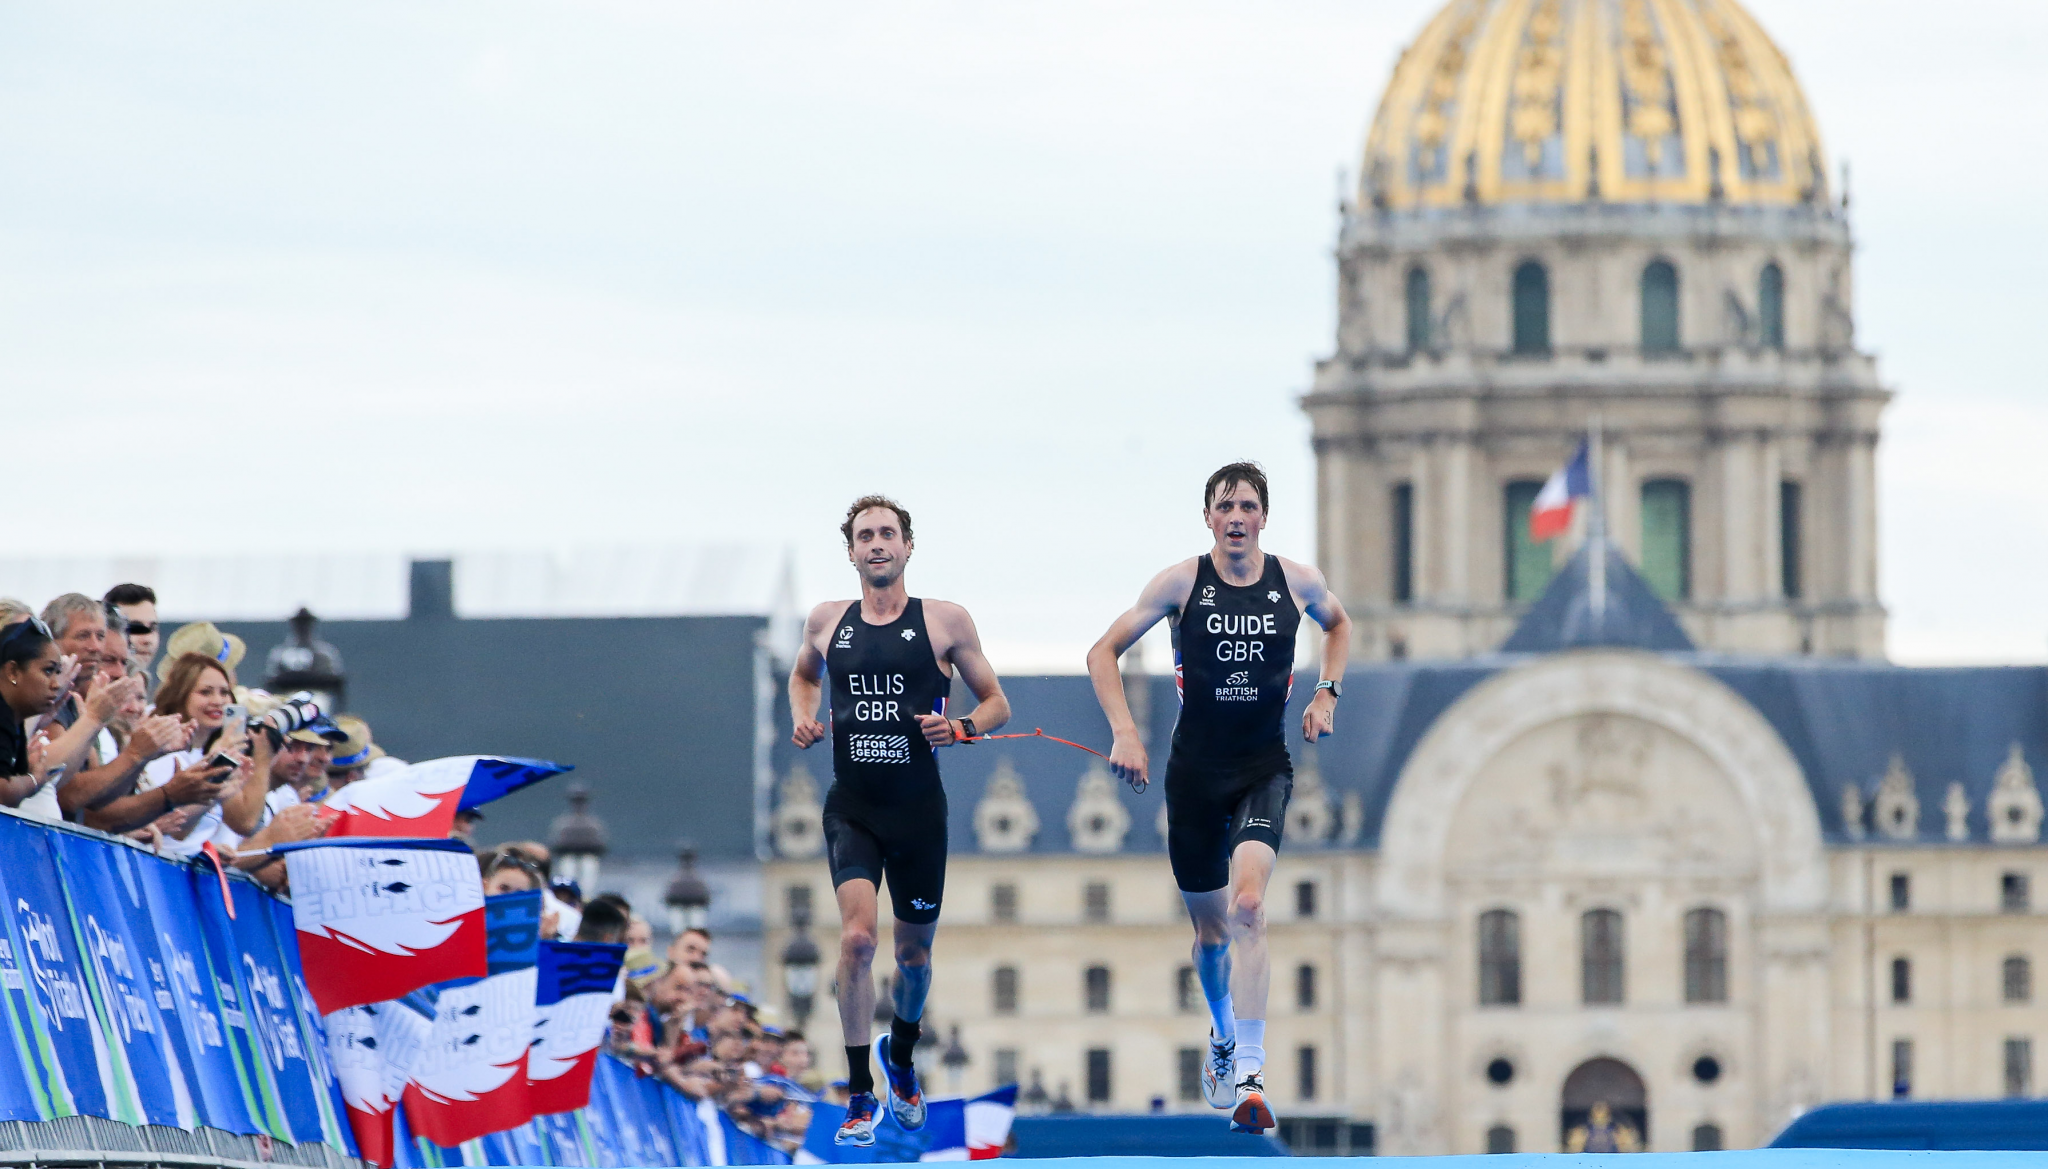 Britain's Dave Ellis and his guide took victory in the men's PTVI category after his rival Kyle Coon miscounted the number of laps remaining in the run ©World Triathlon